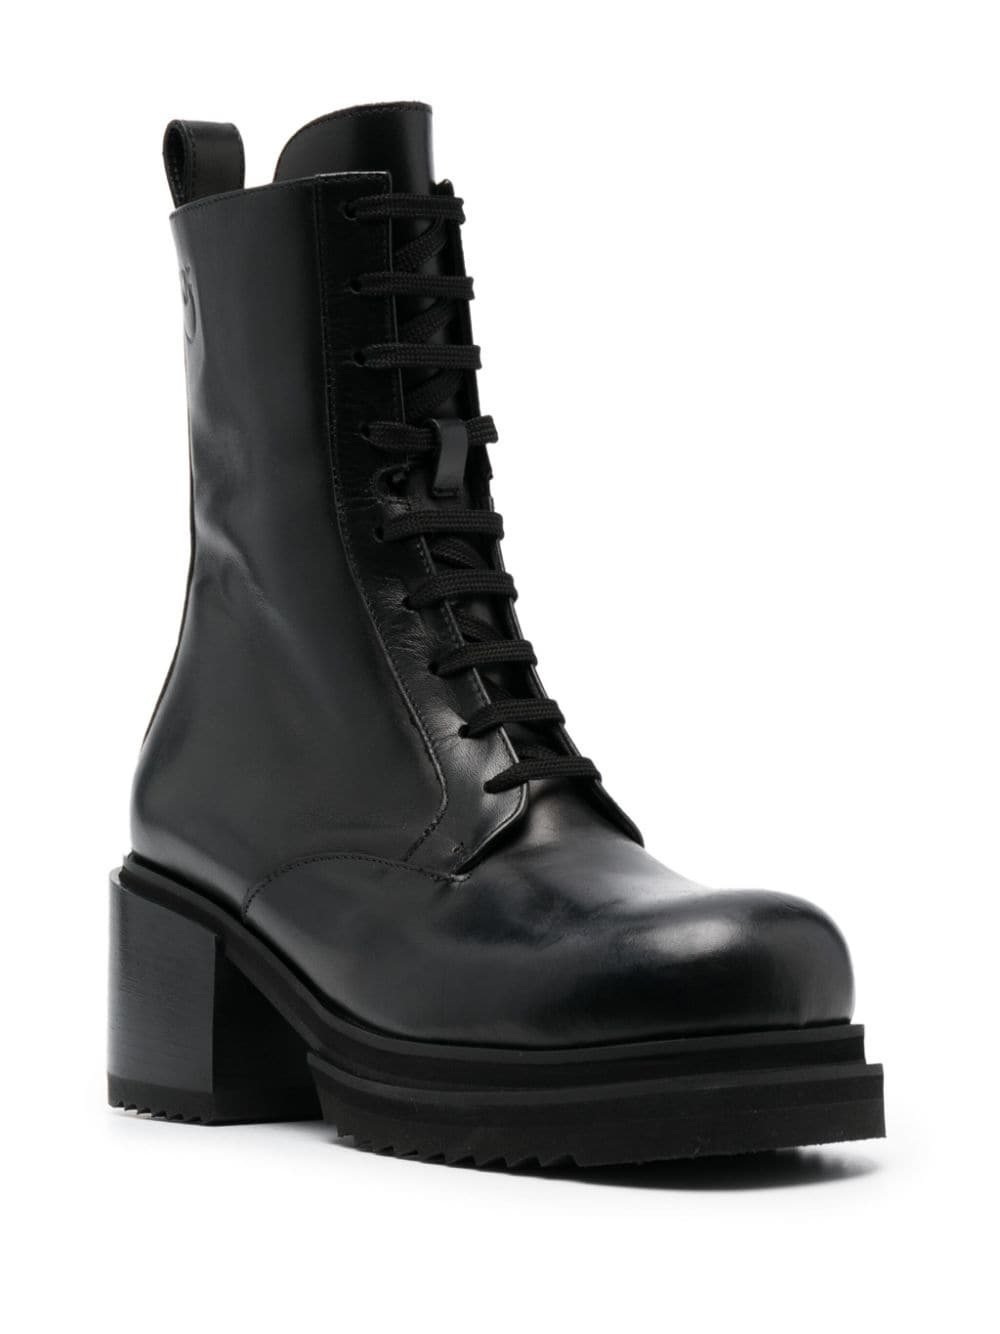 70mm leather combat boots - 2